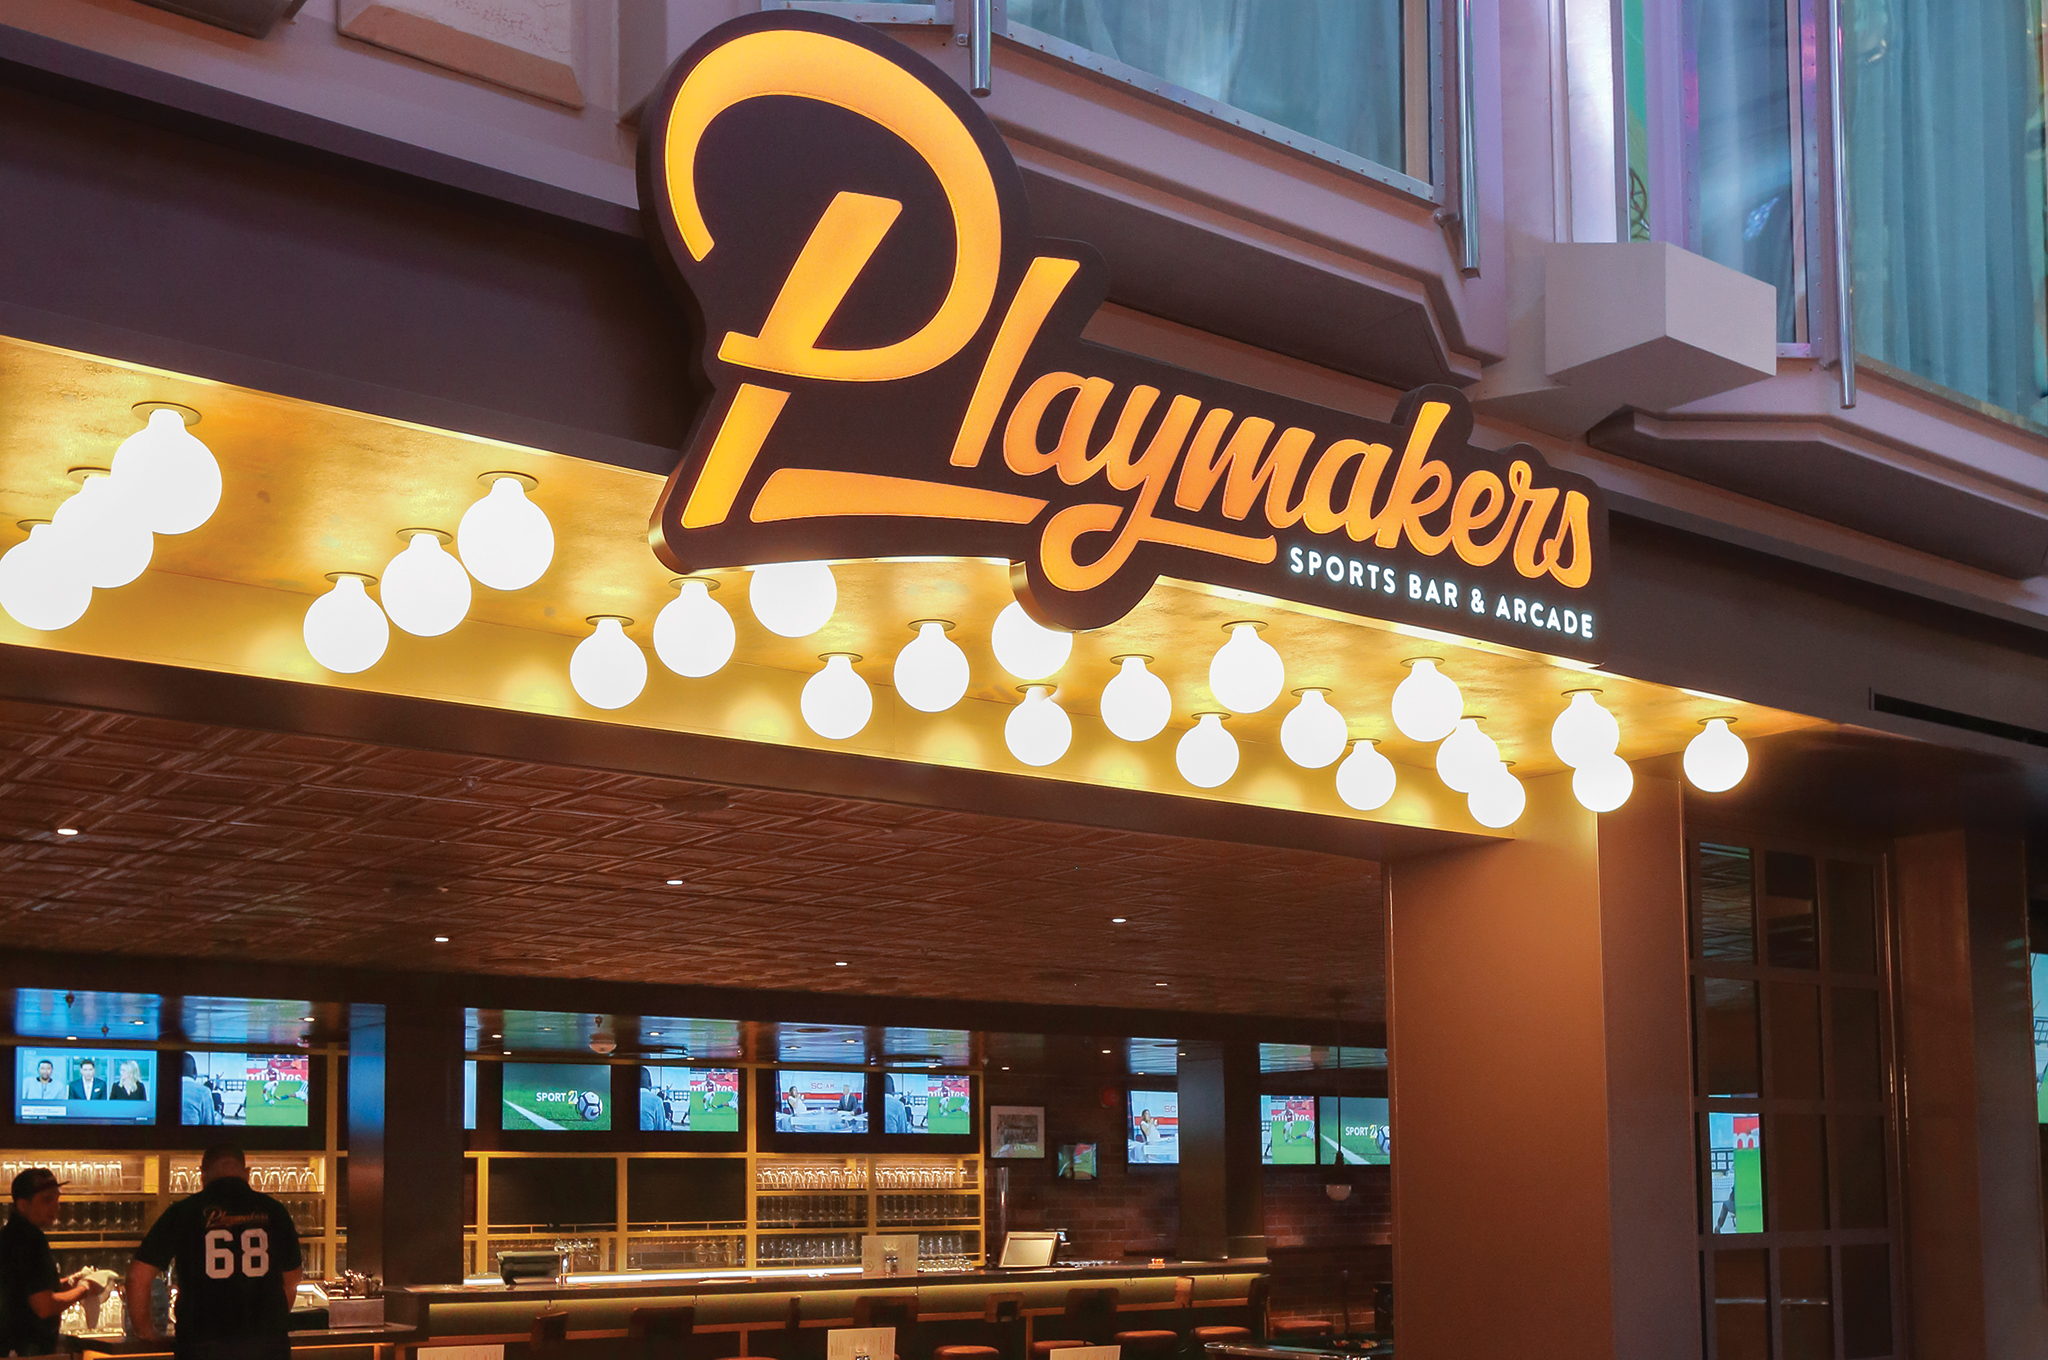 Playmakers℠ Sports Bar & Arcade